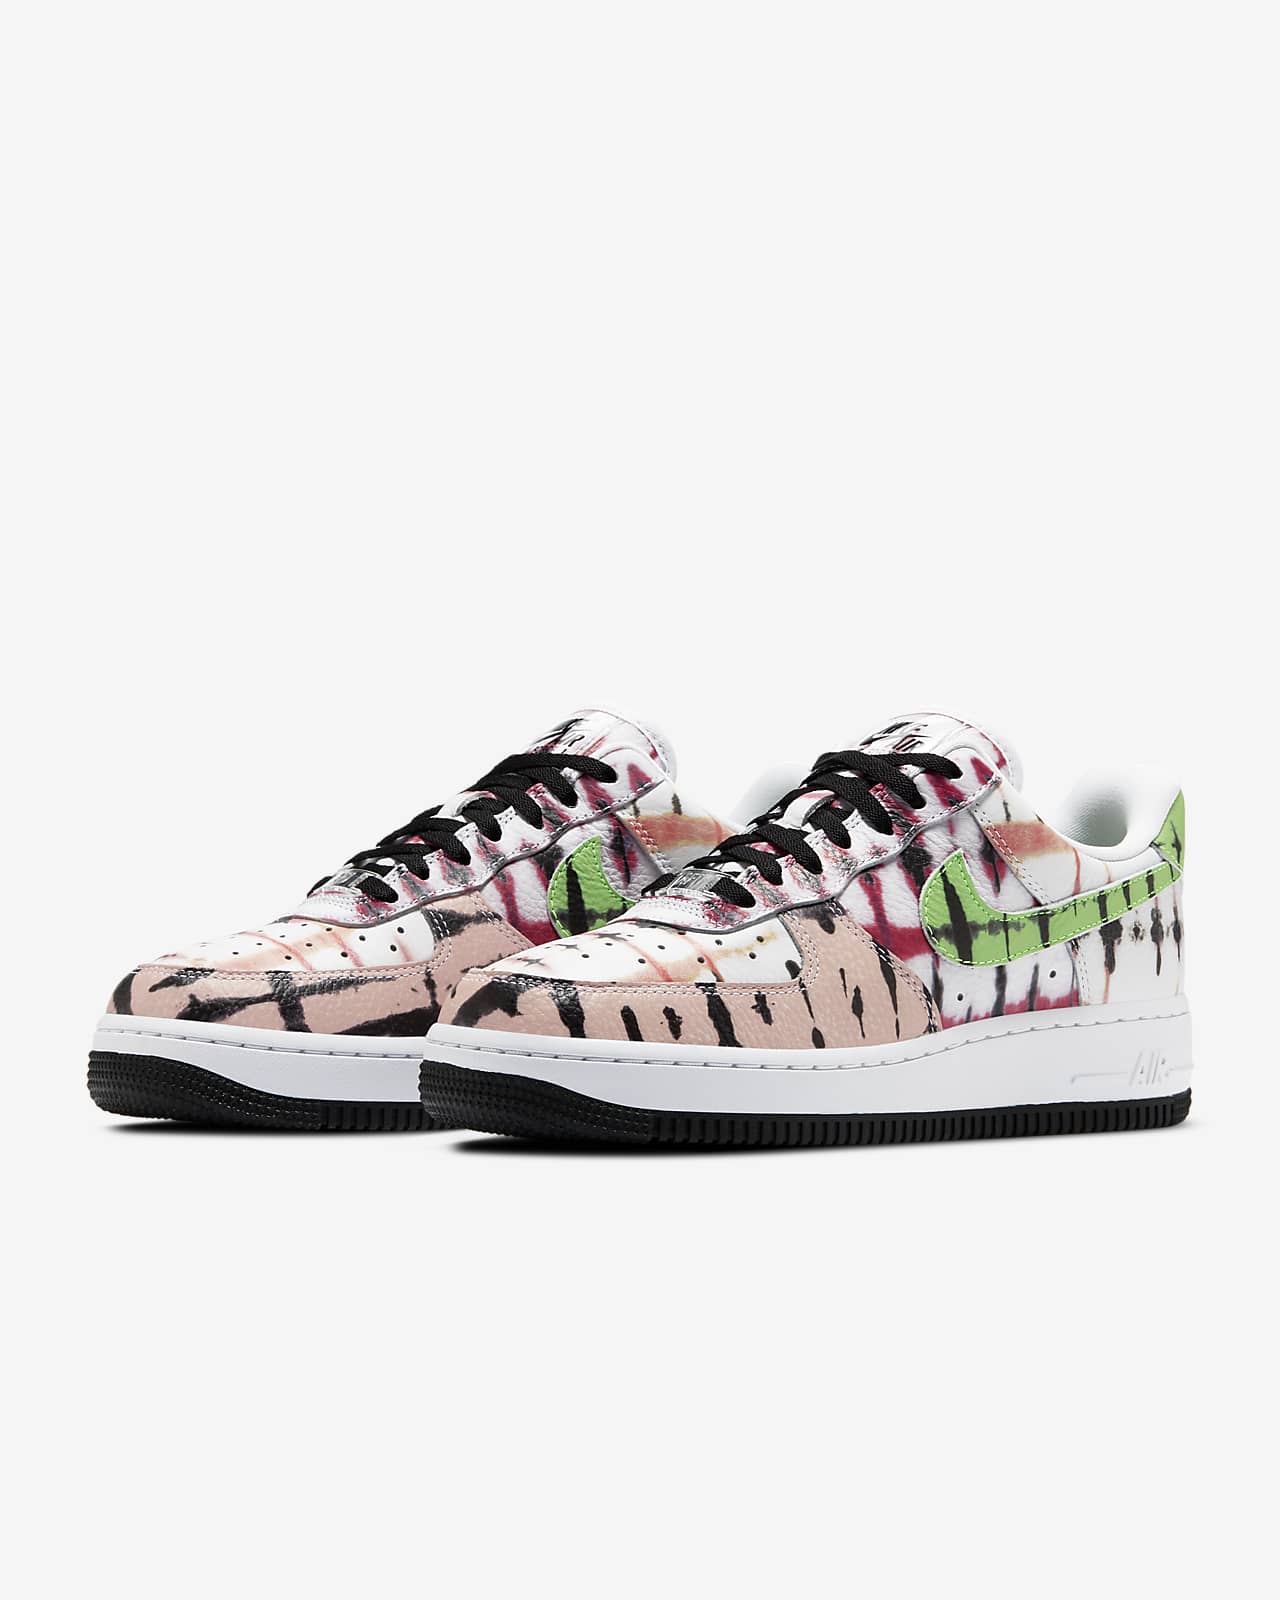 nike air force ones 07 women's